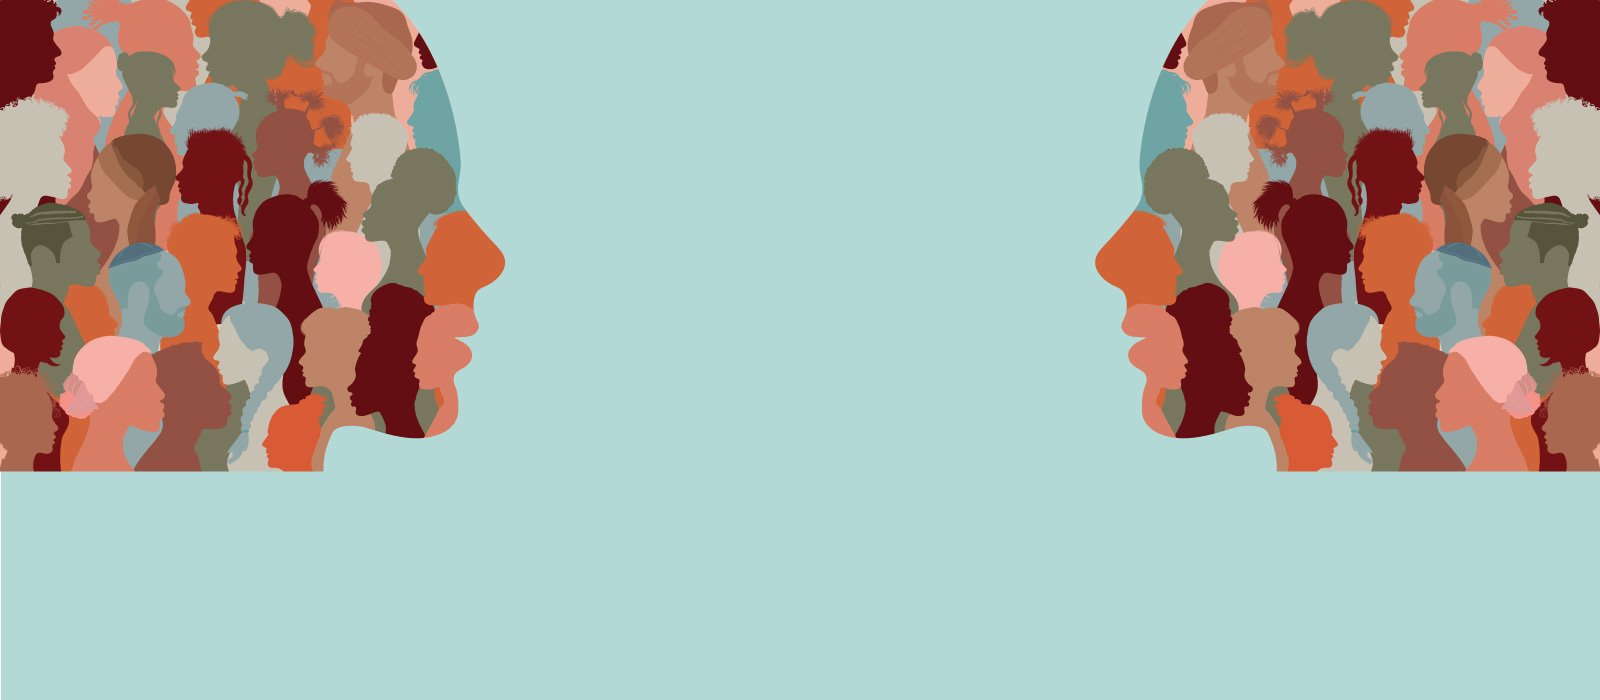 Overlapping faces on a light blue background